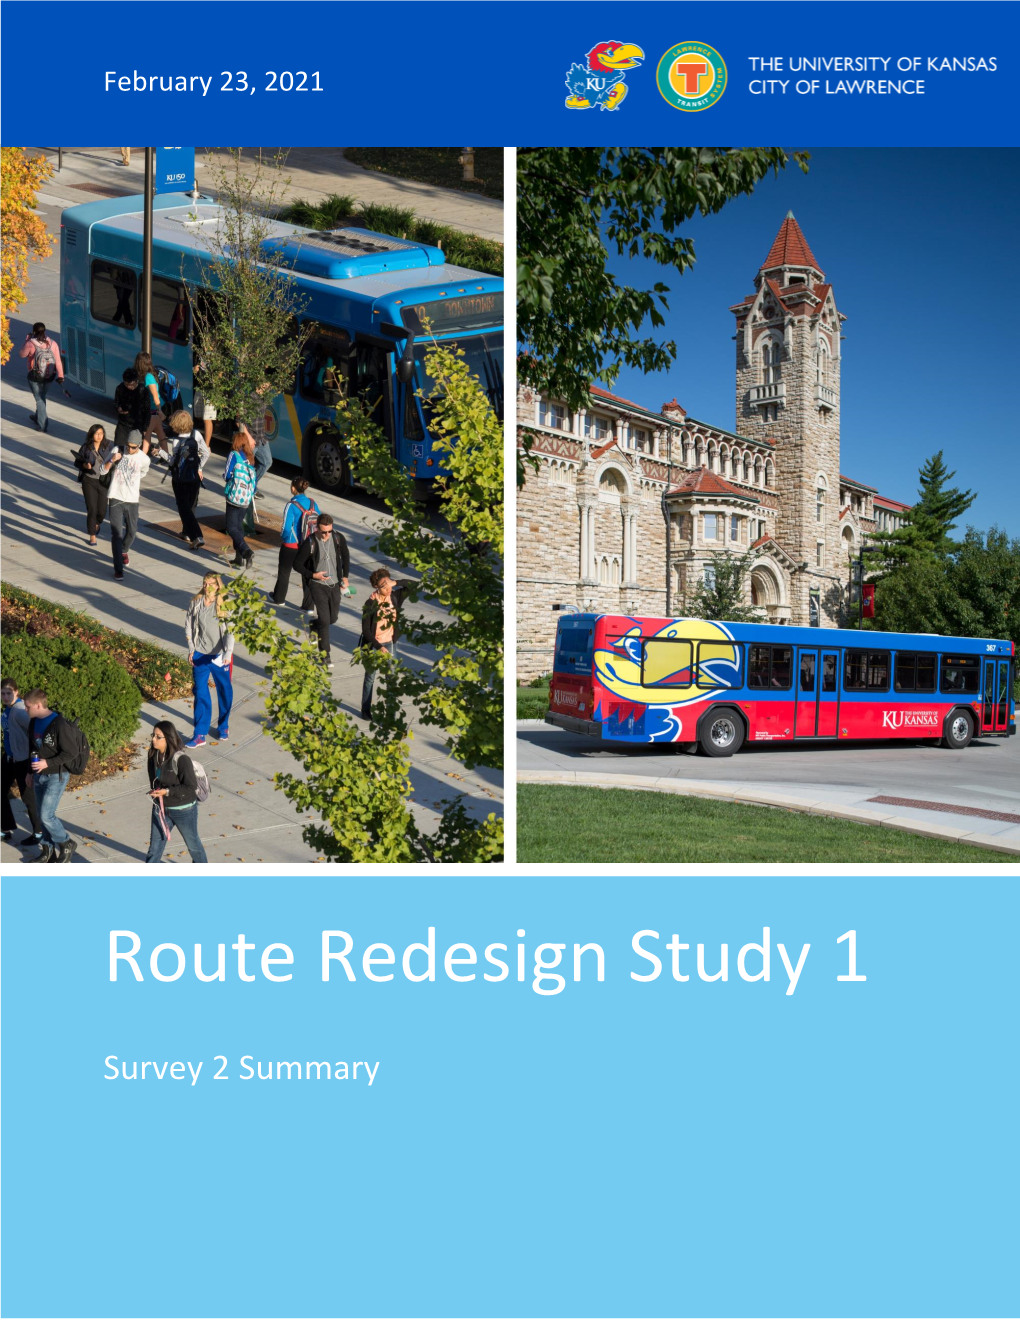 2020 Route Redesign Study 1 – Survey 2 Summary